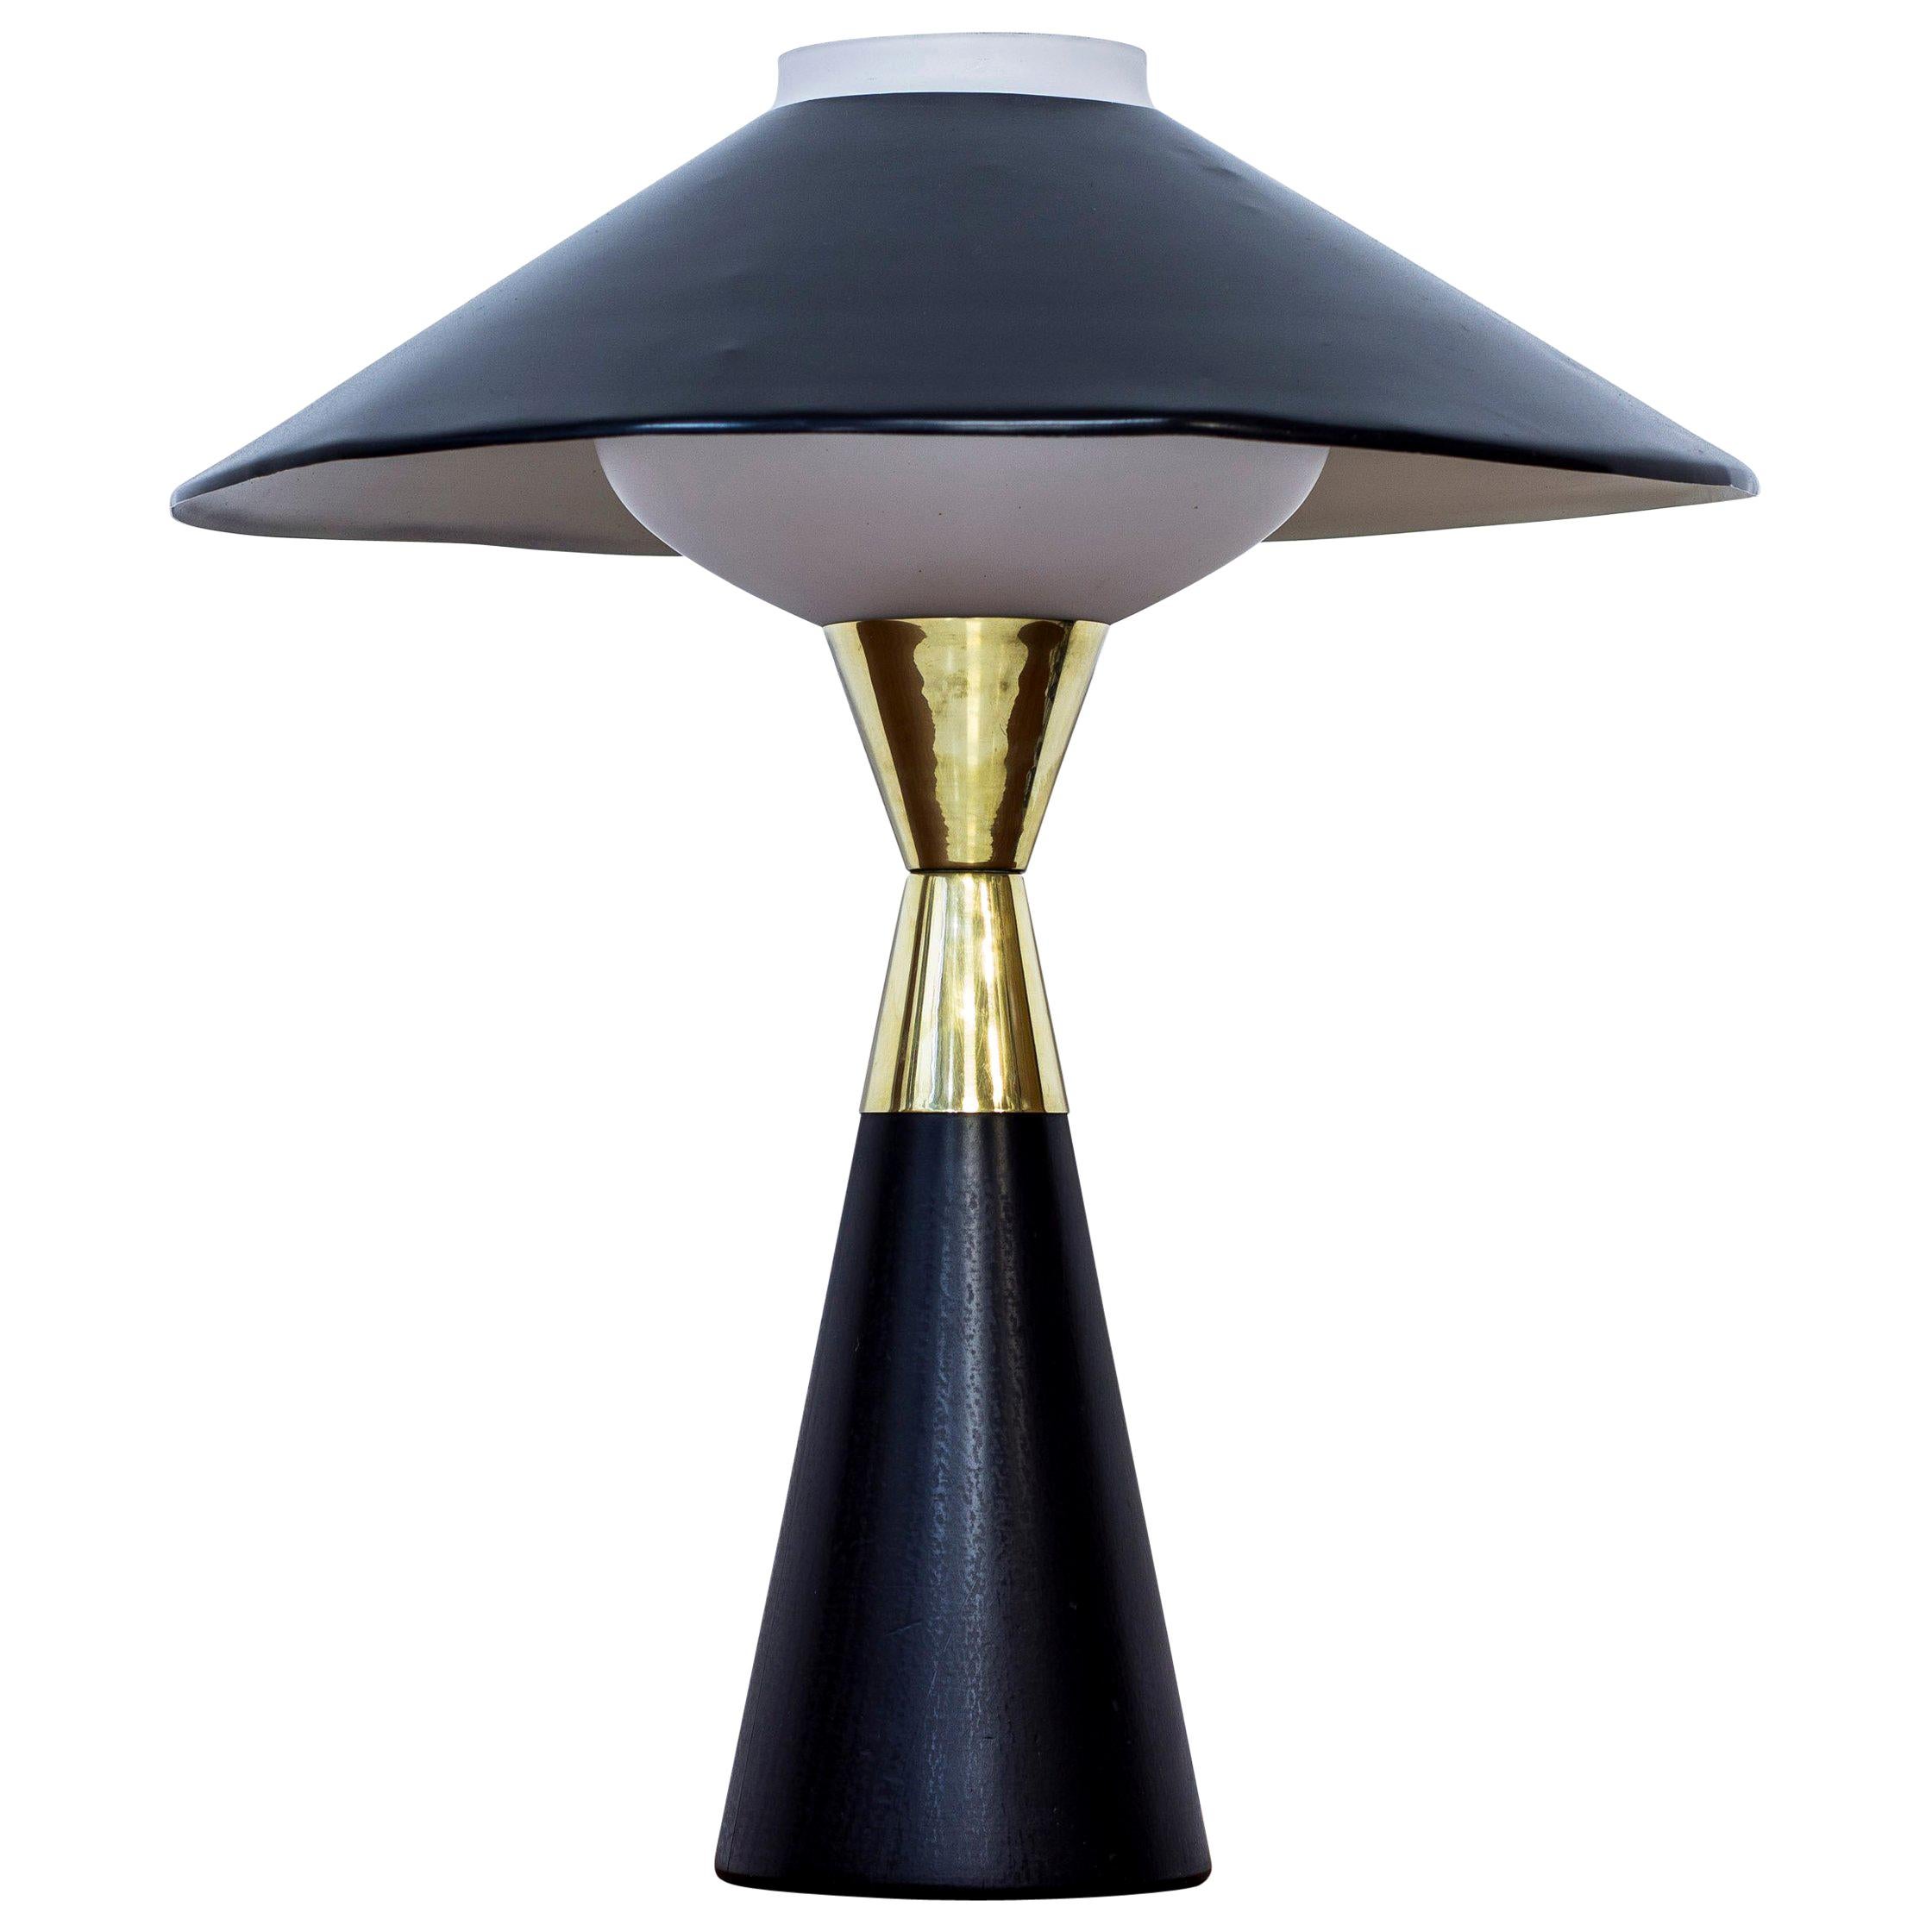 Table Lamp Model "A 6160" by ASEA Belysning, Sweden, circa 1957